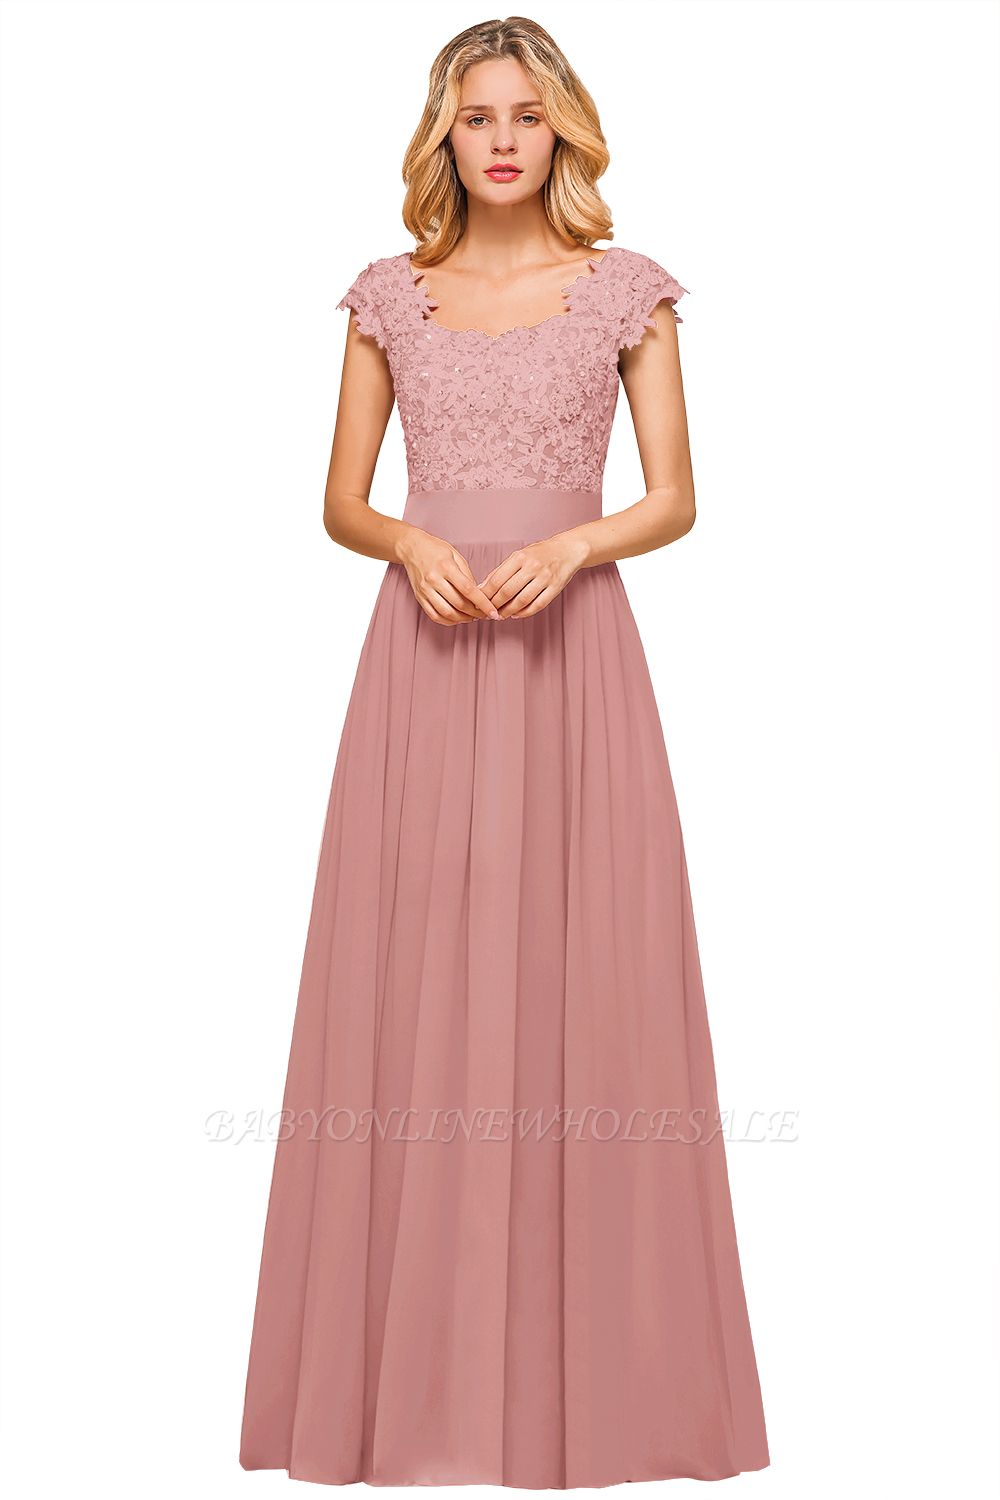 Burgundy Cap sleeves Lace Evening Gowns with Appliques | Chiffon Long Mother of the bride dress